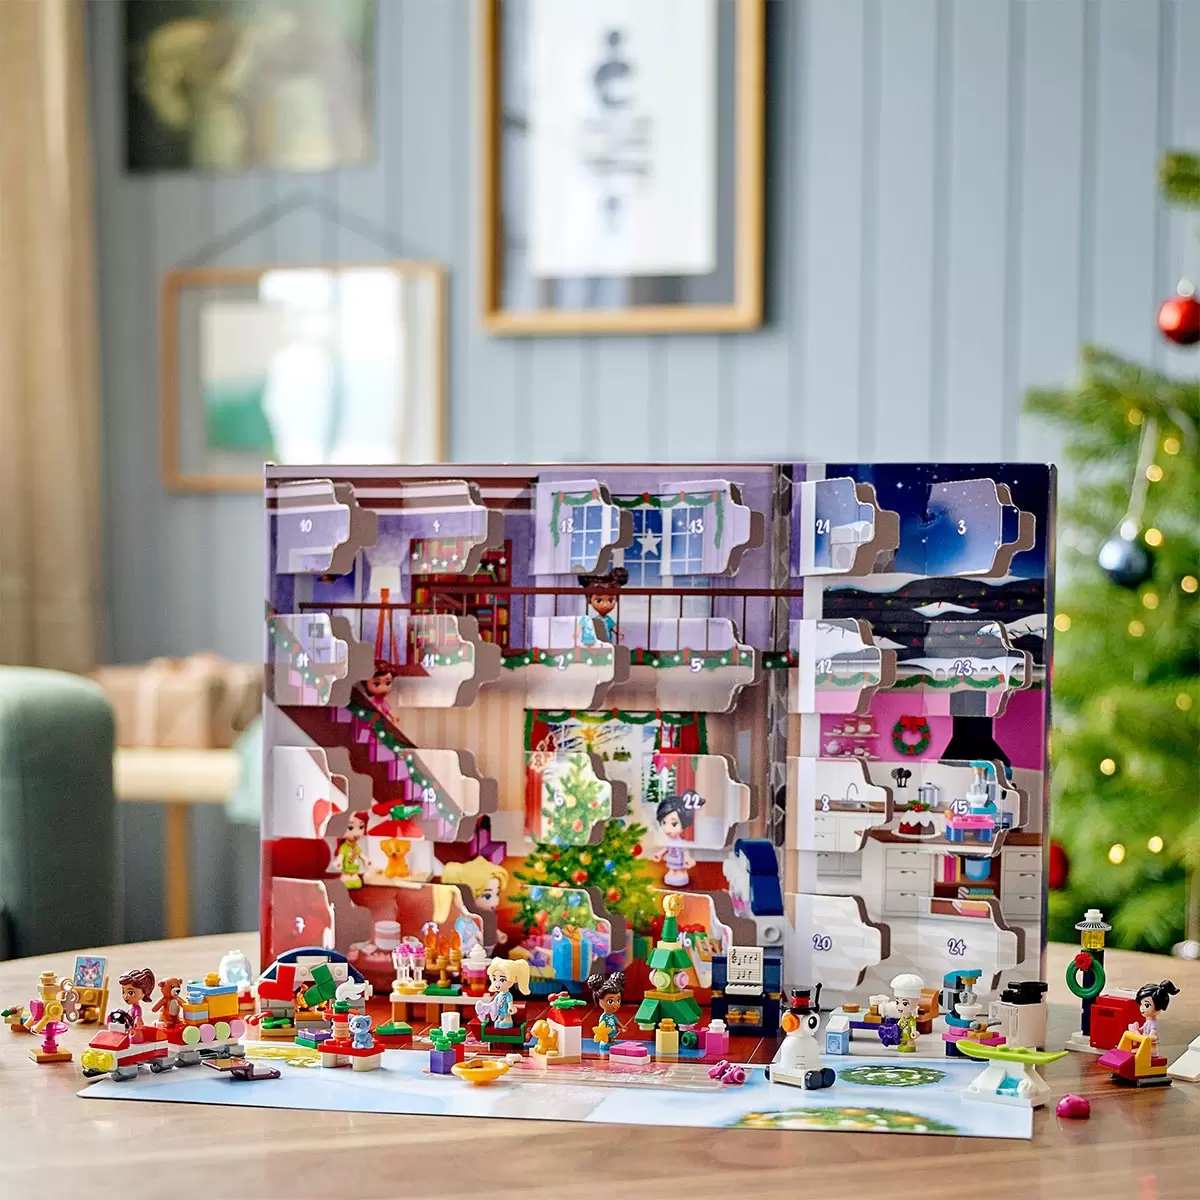 Buy LEGO Friends Advent Calendar Lifestyle2 Image at Costco.co.uk